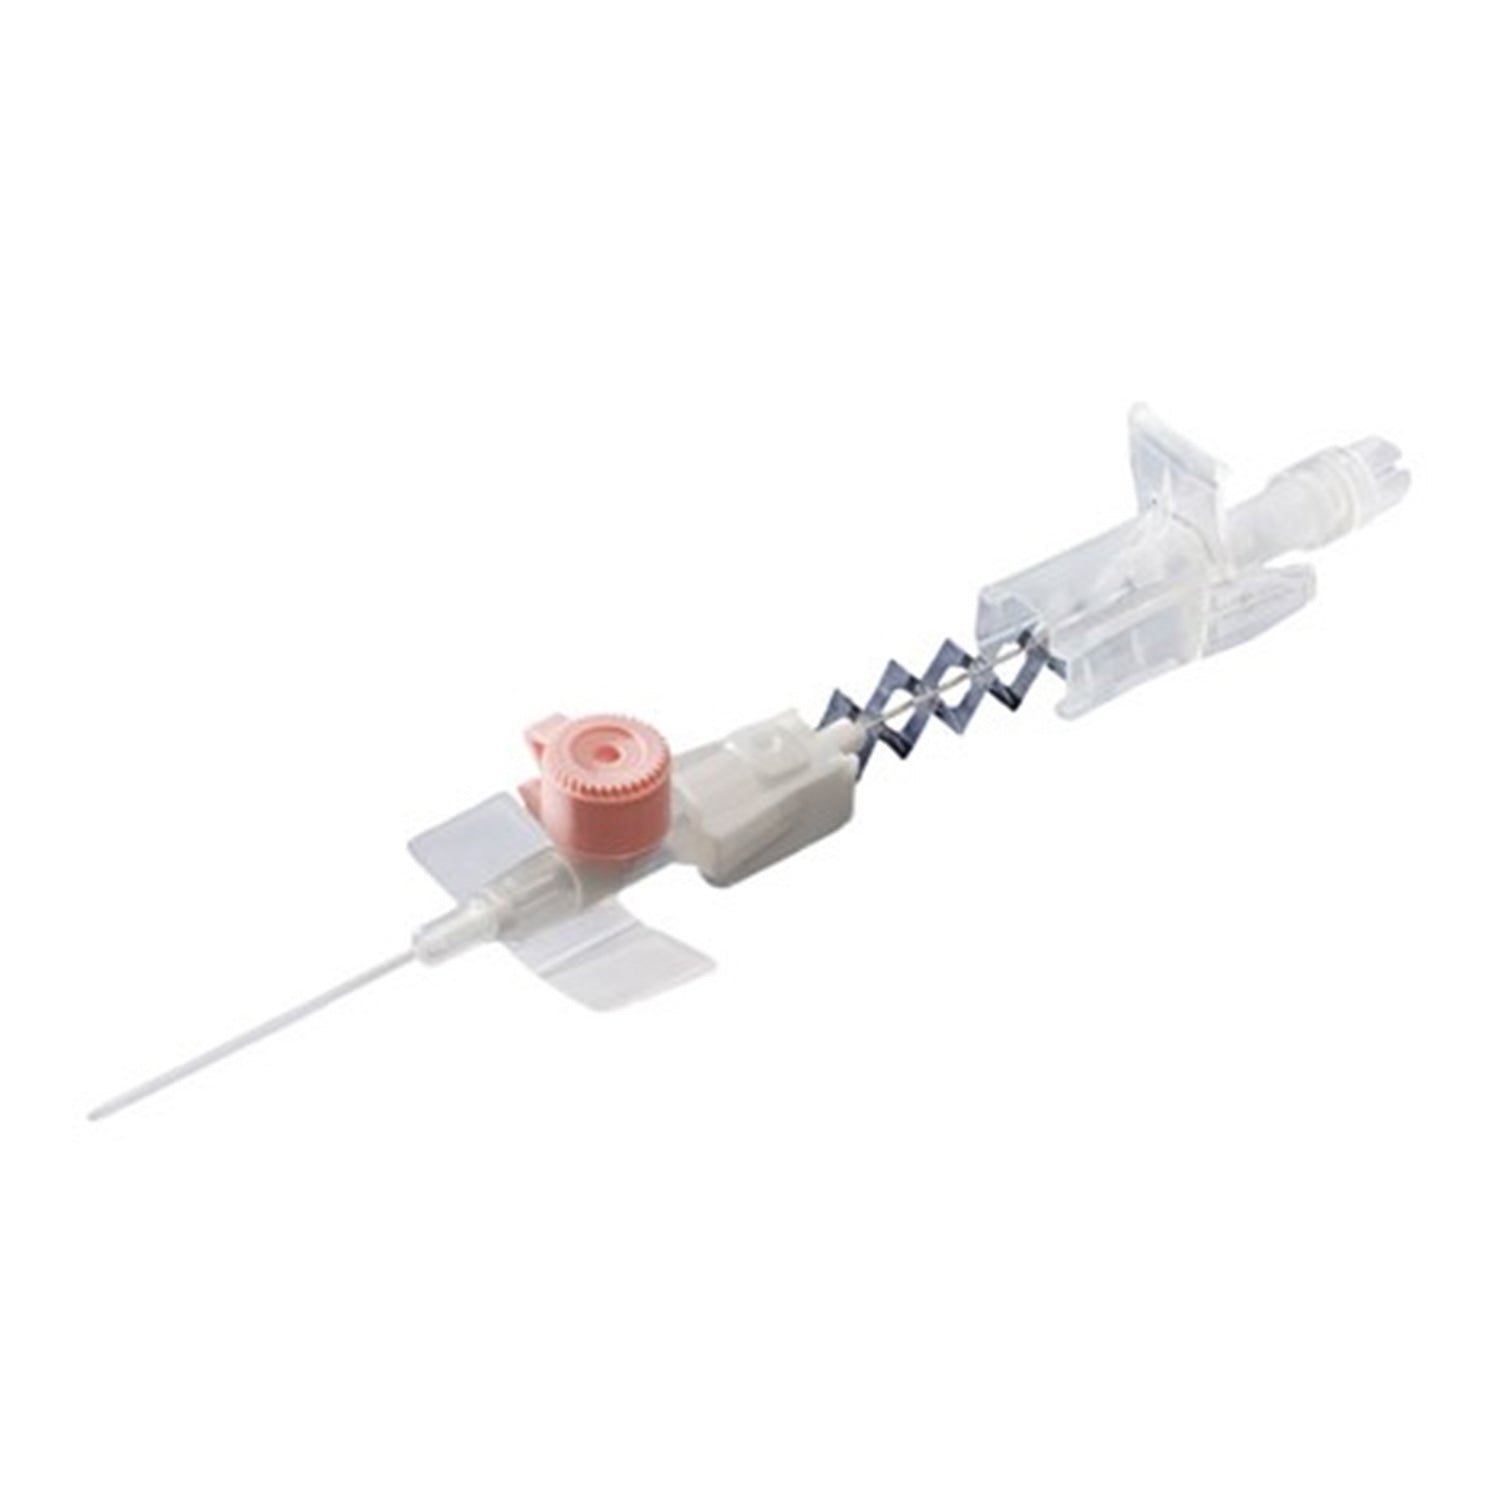 BD Venflon Pro Safety Peripheral IV Cannula with Injection Port | Pink | 20G x 32mm | Pack of 50